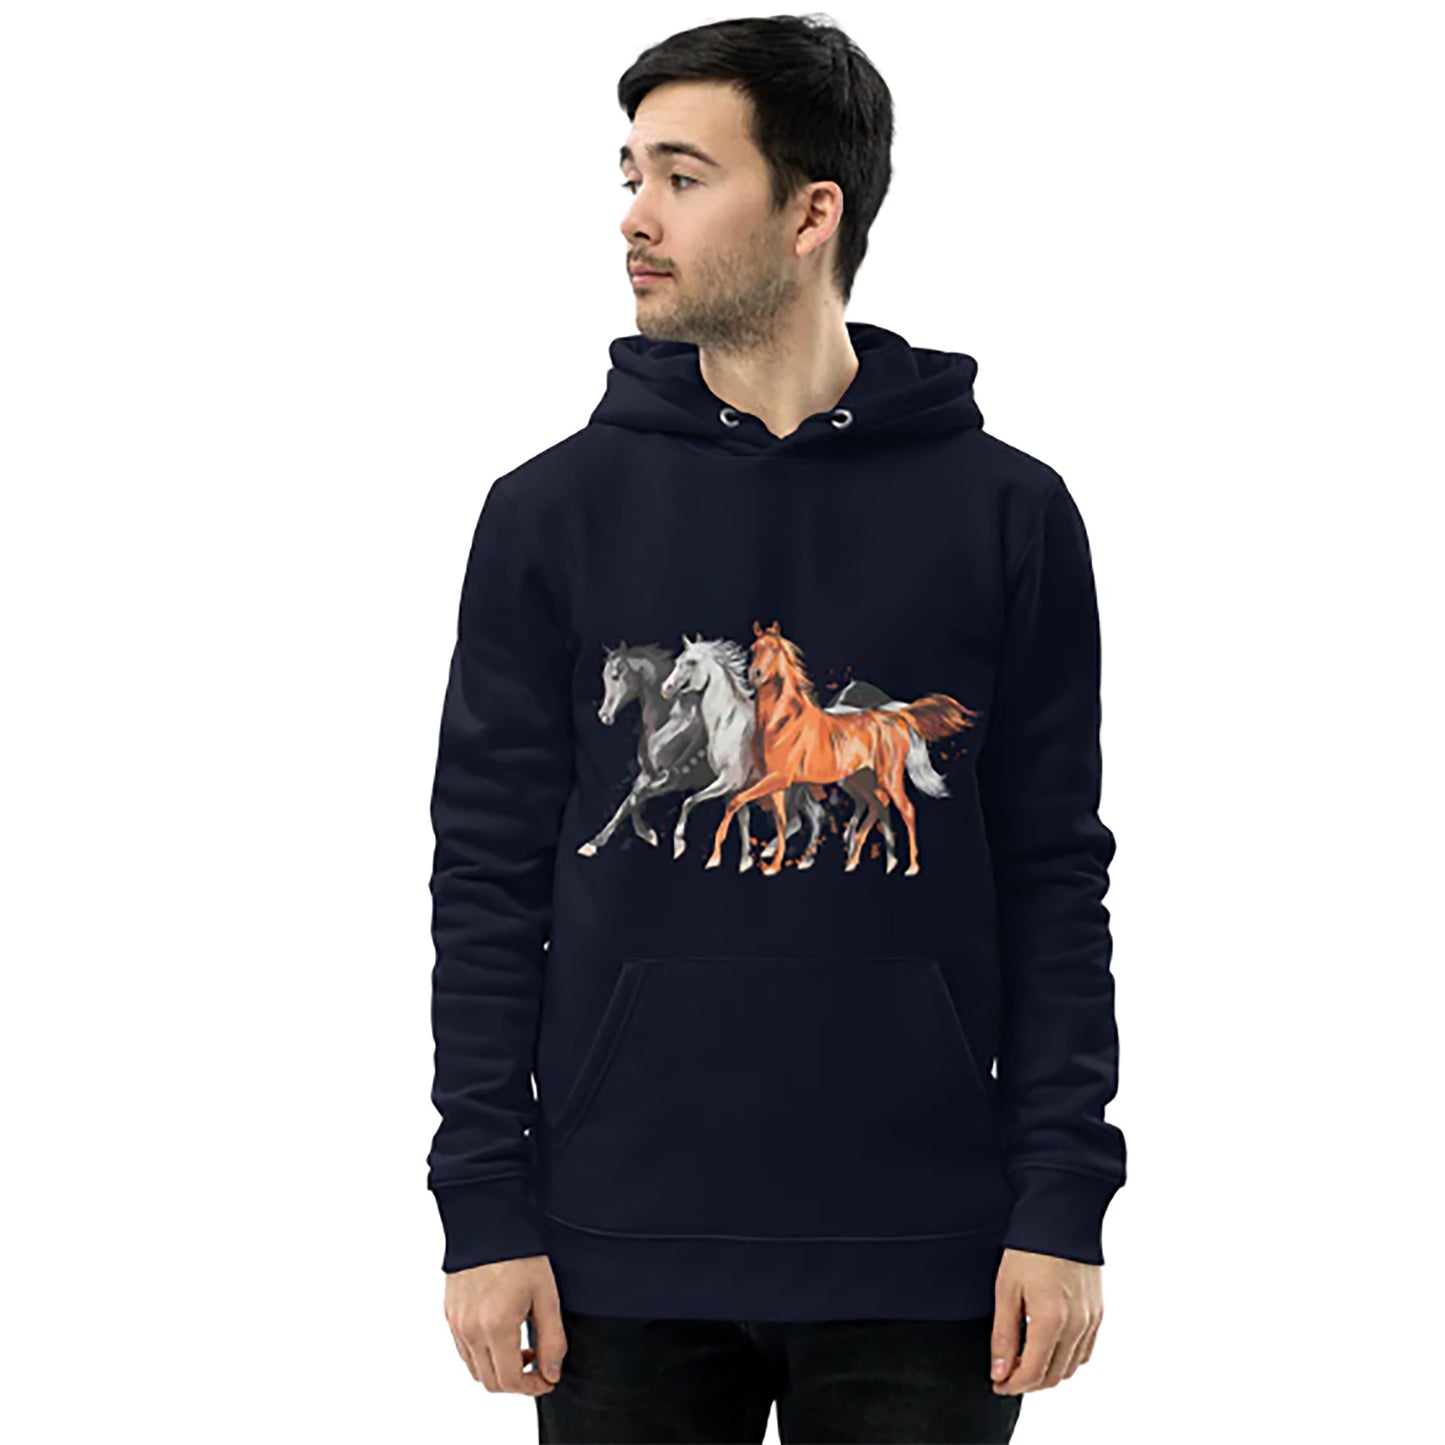 Women and Men's eco hoodie printed with horses